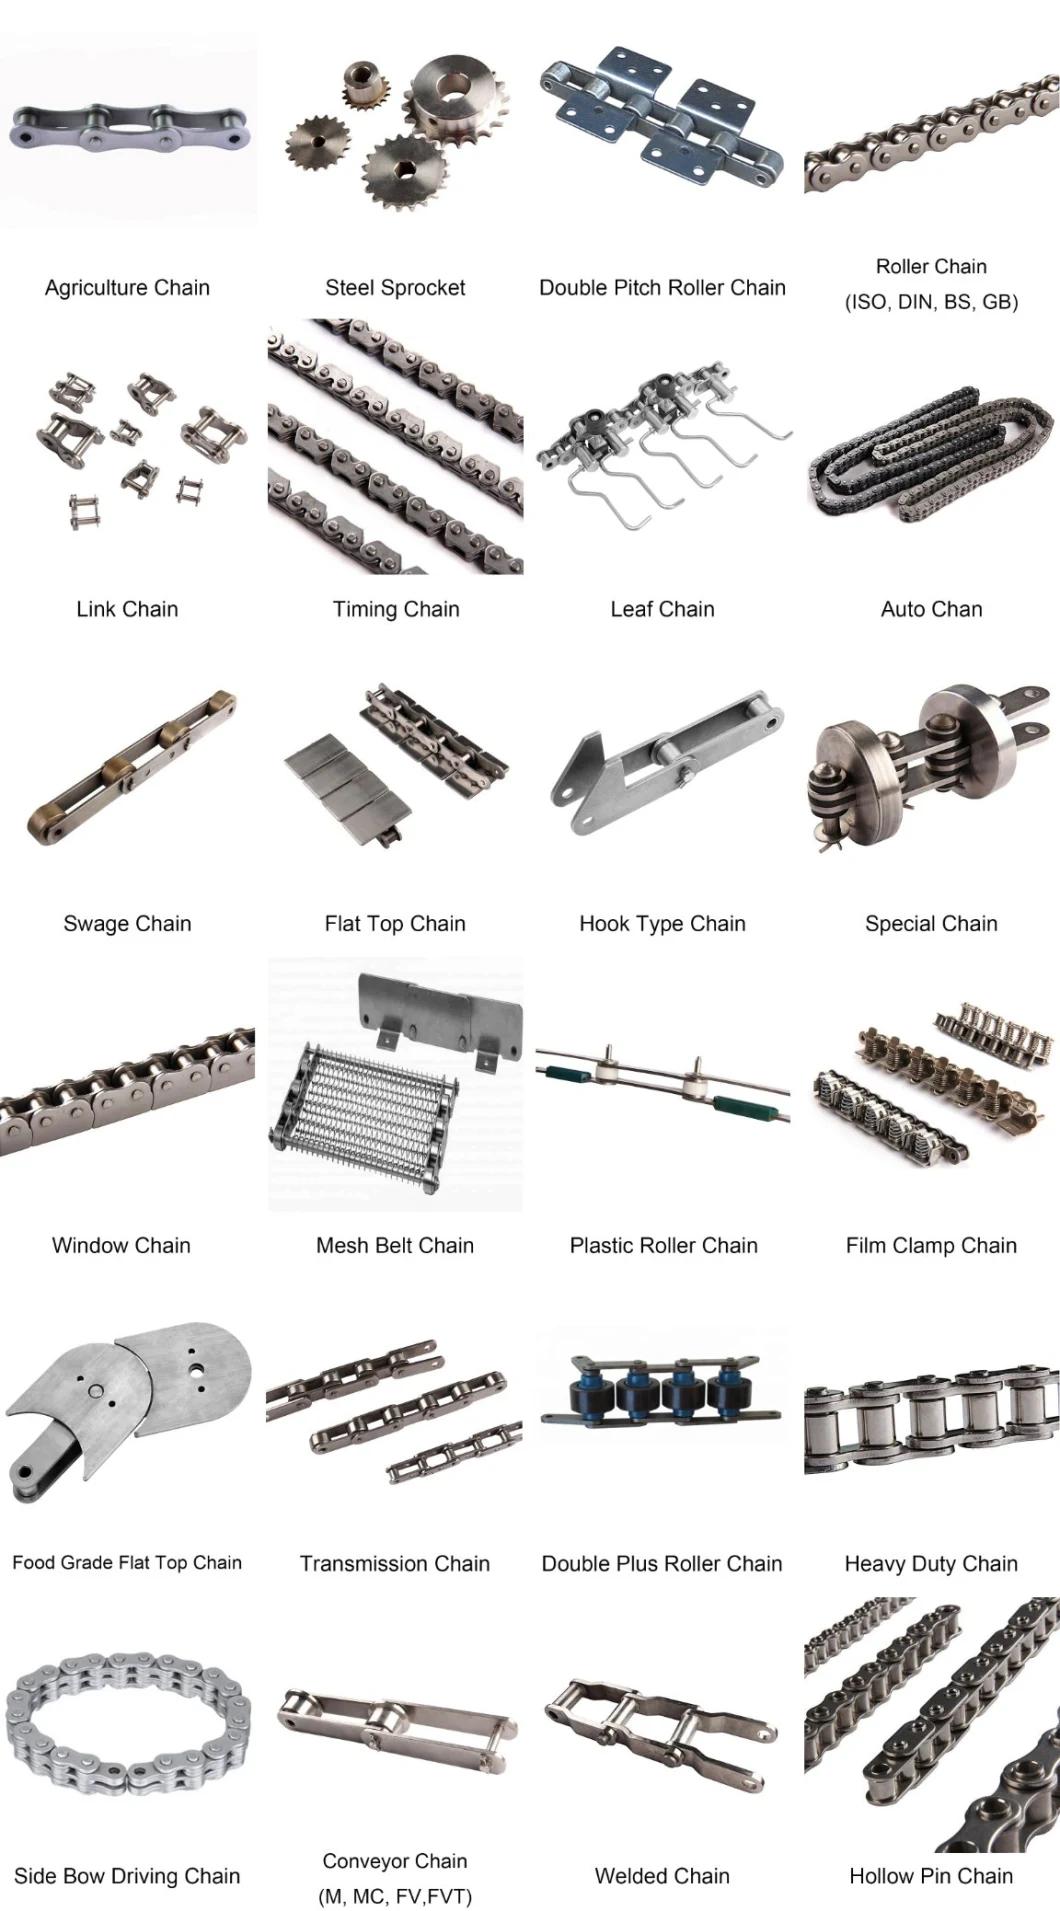 DIN ANSI ISO BS Js Standard Stainless Steel Lumber Conveyor Roller Chain and Attachment